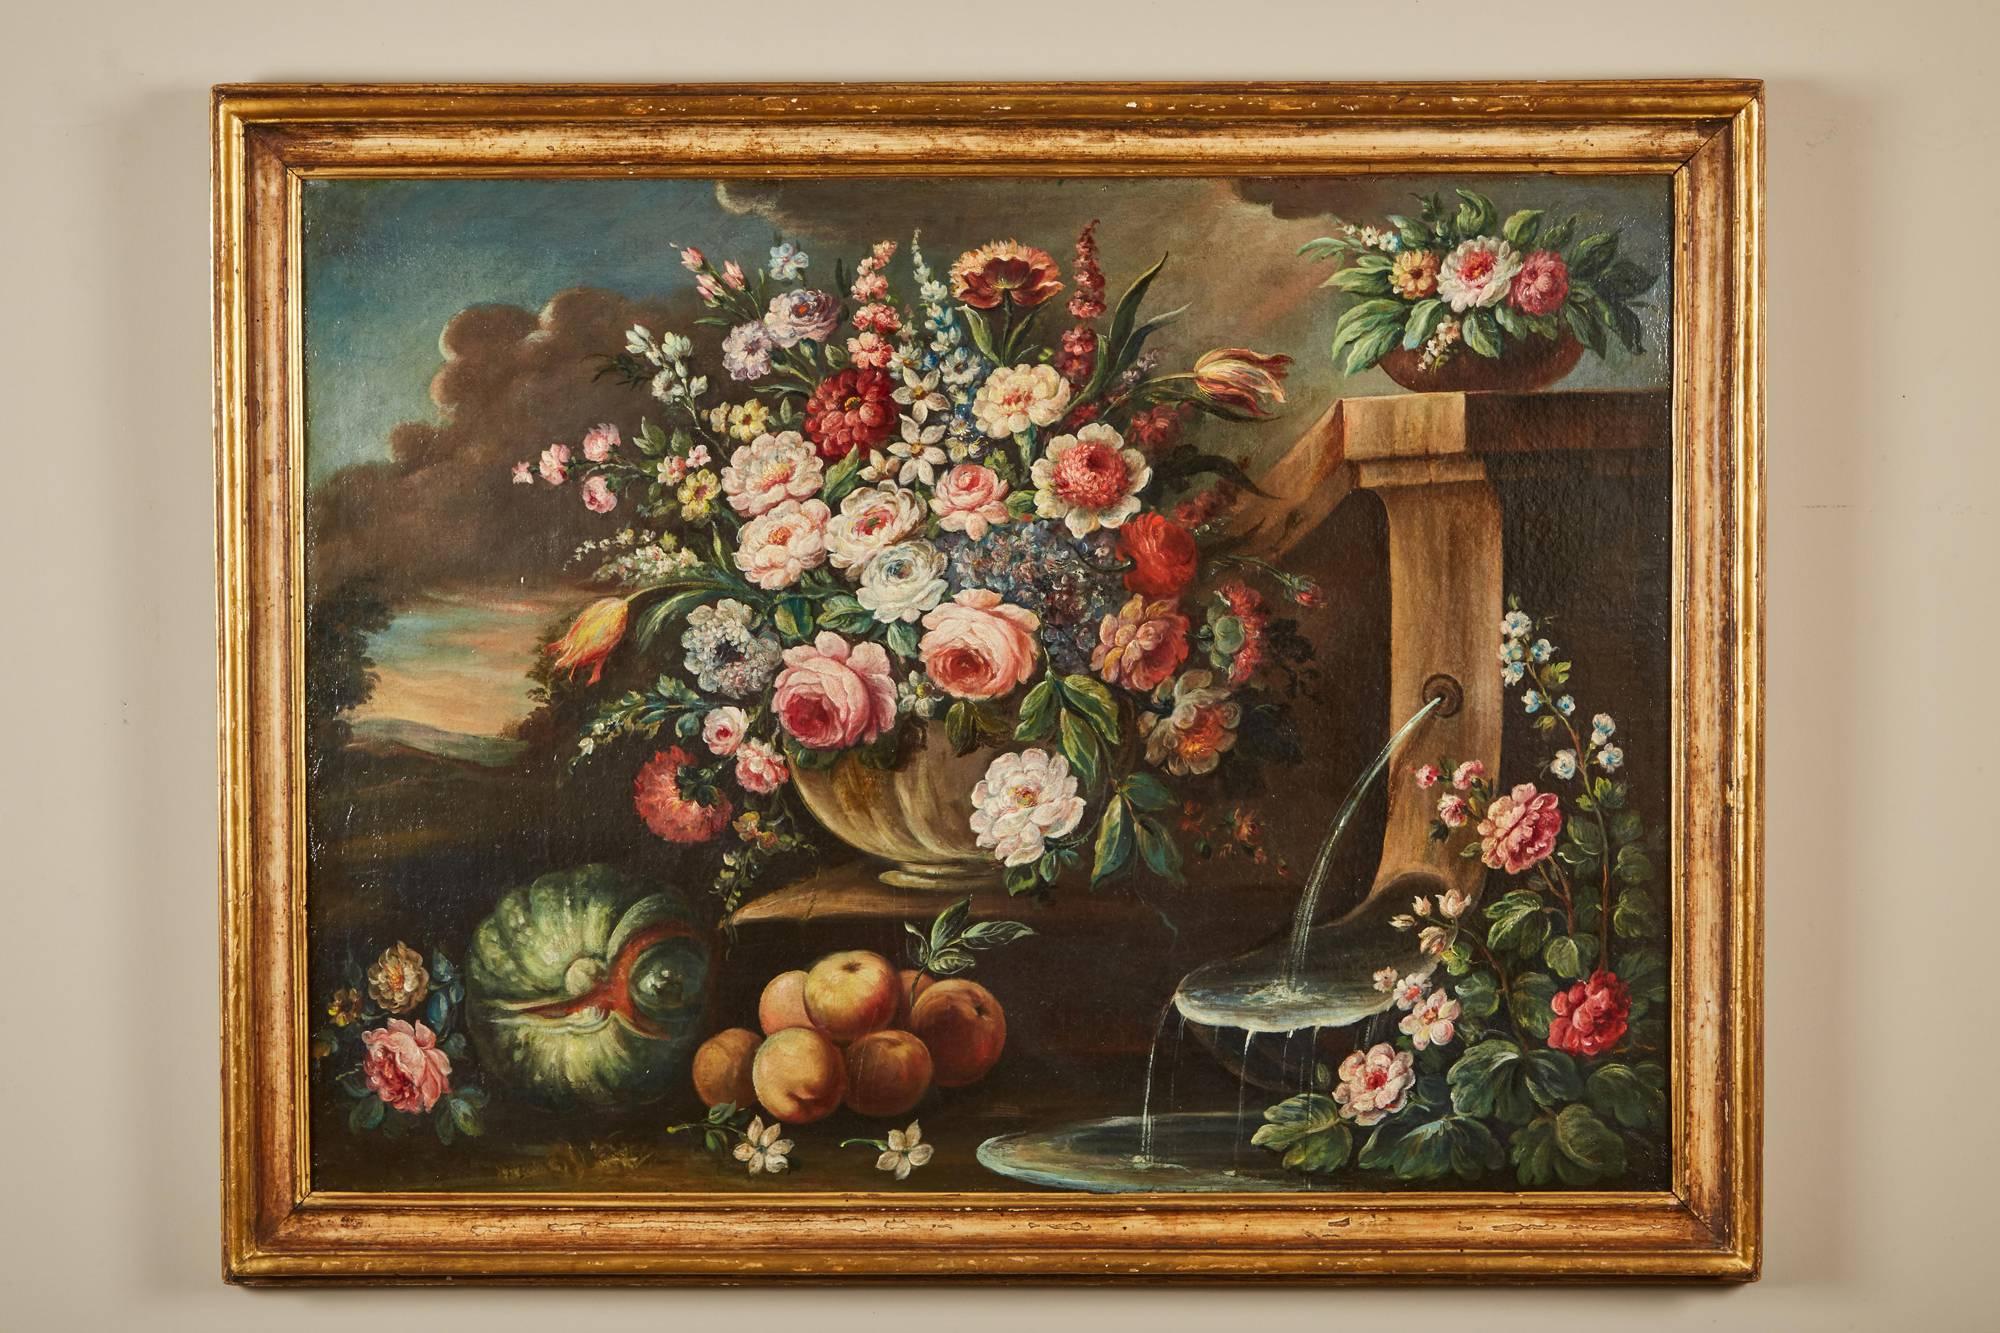 A 19th century Italian school life large oil-on-canvas painting within a gilt wood frame painting depicts a vase with a floral arrangement, a fountain and fruit, within a landscape in the background, a light fixture attached to the frame.